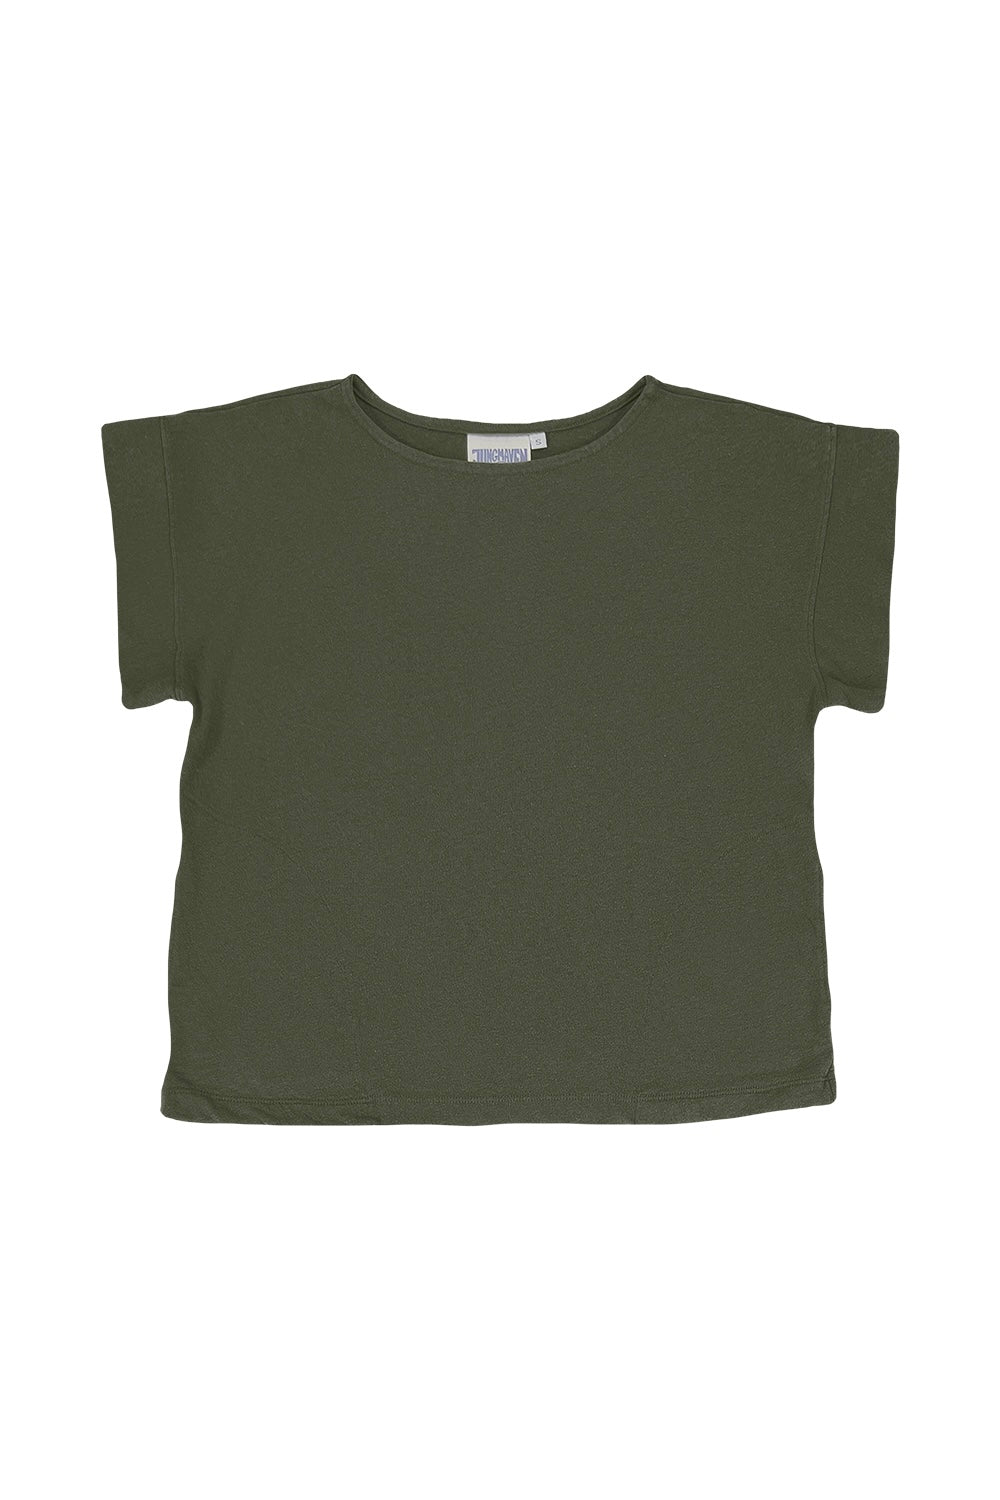 Taos Top | Jungmaven Hemp Clothing & Accessories / Color: Olive Green